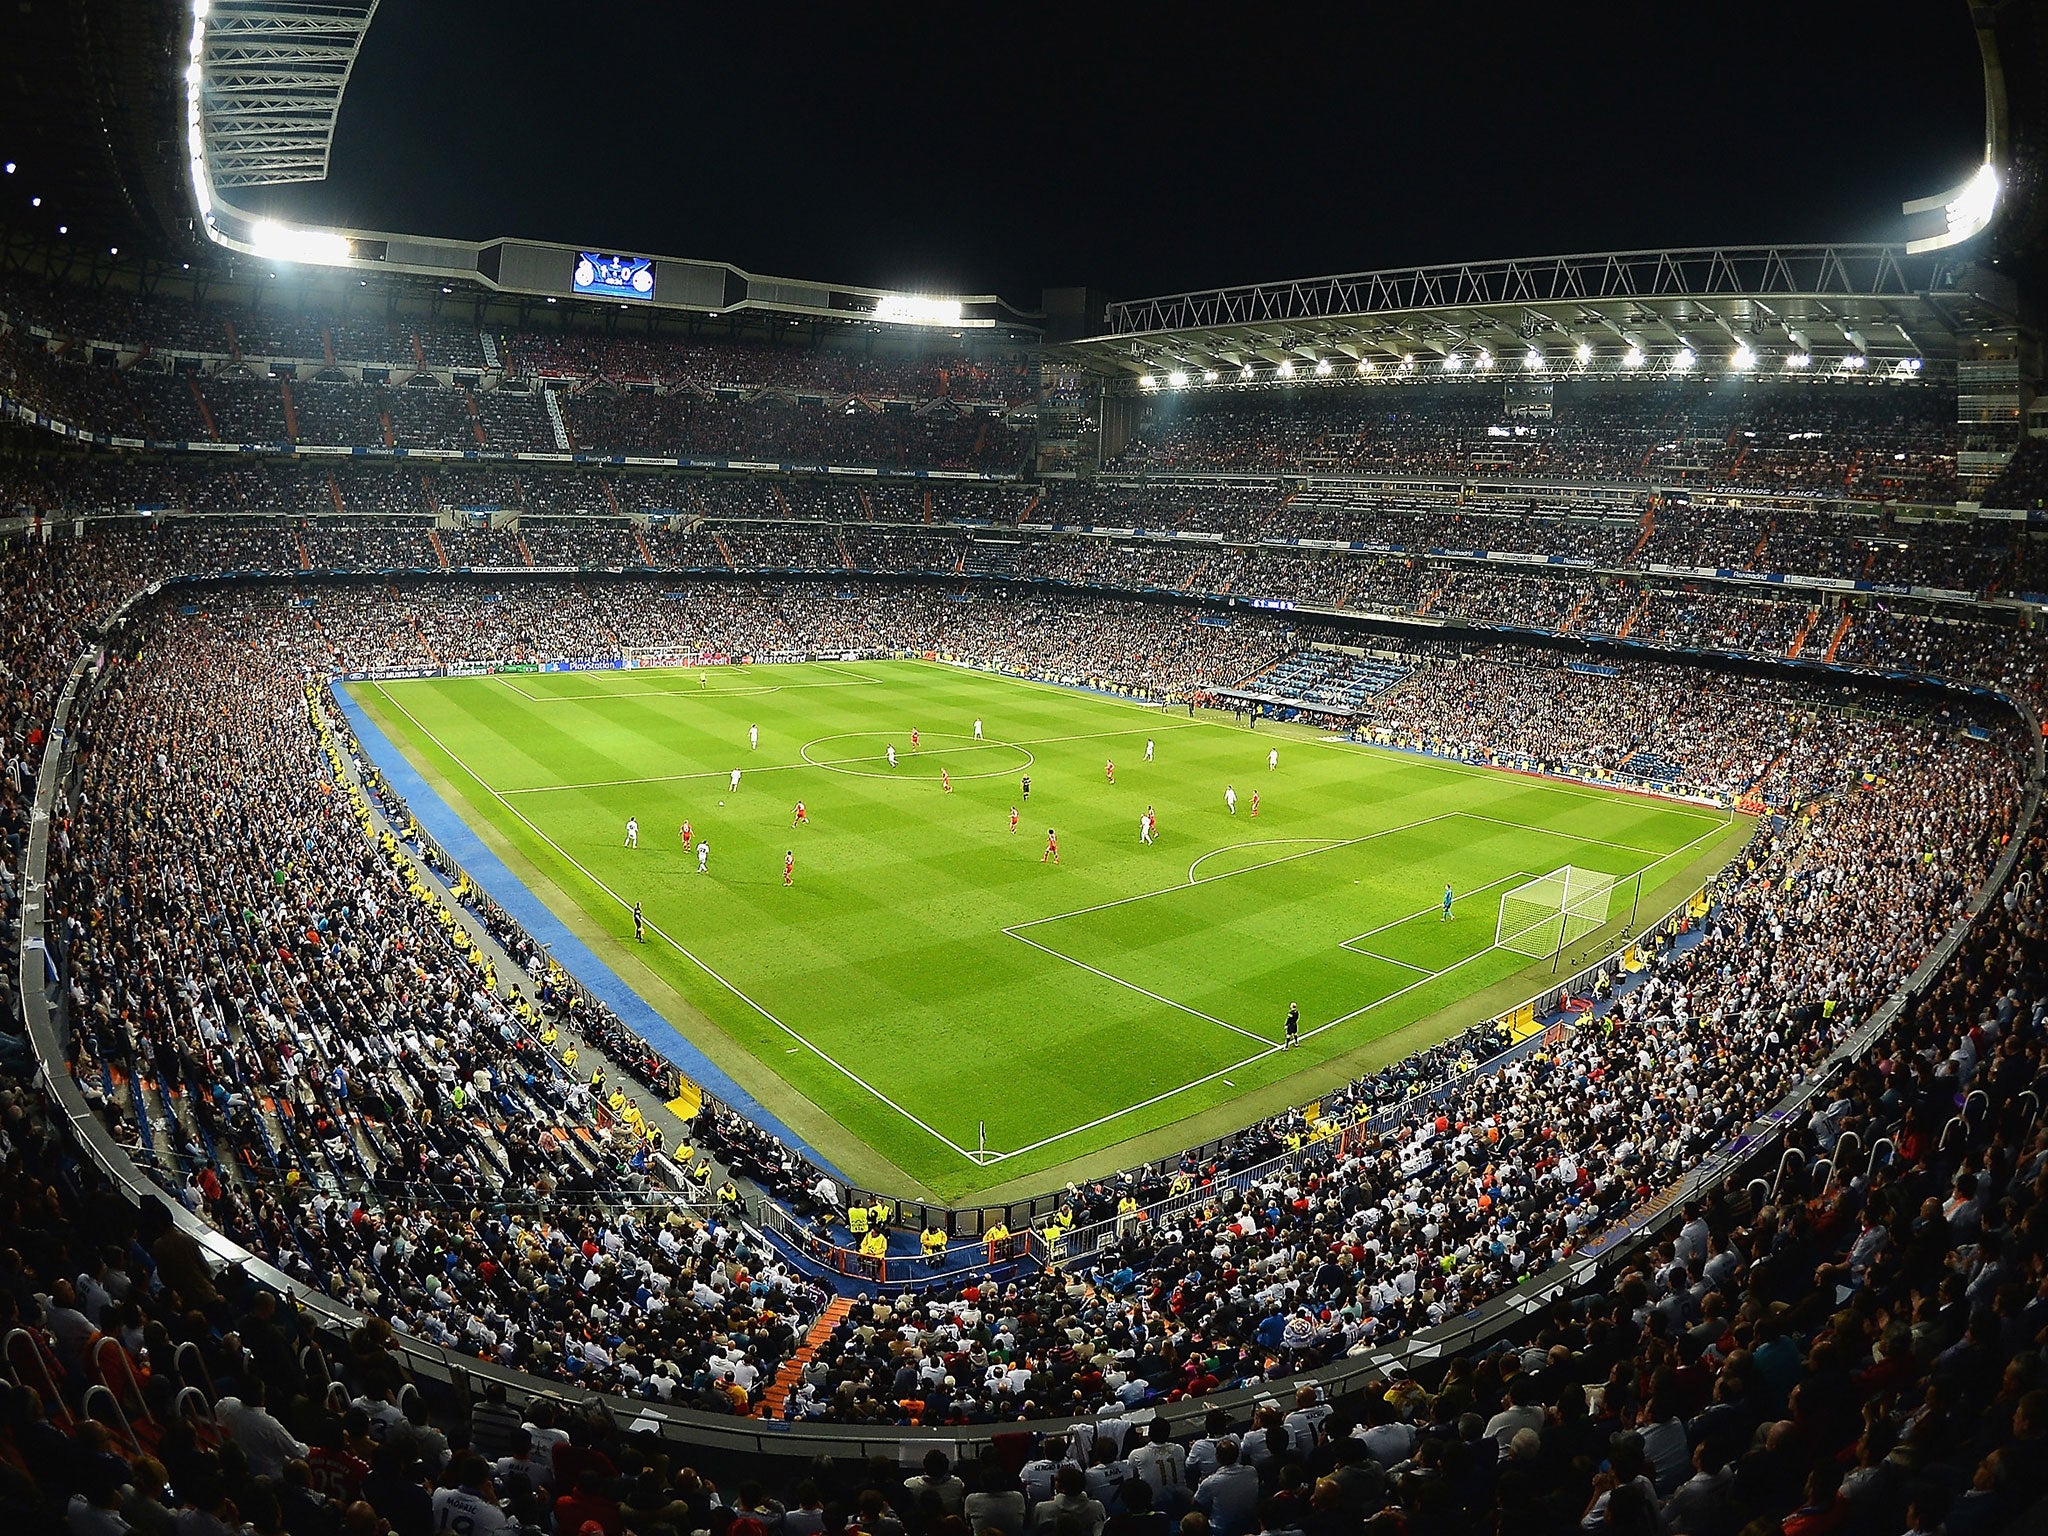 The Santiago Bernabeu could host a UFC event some time next year